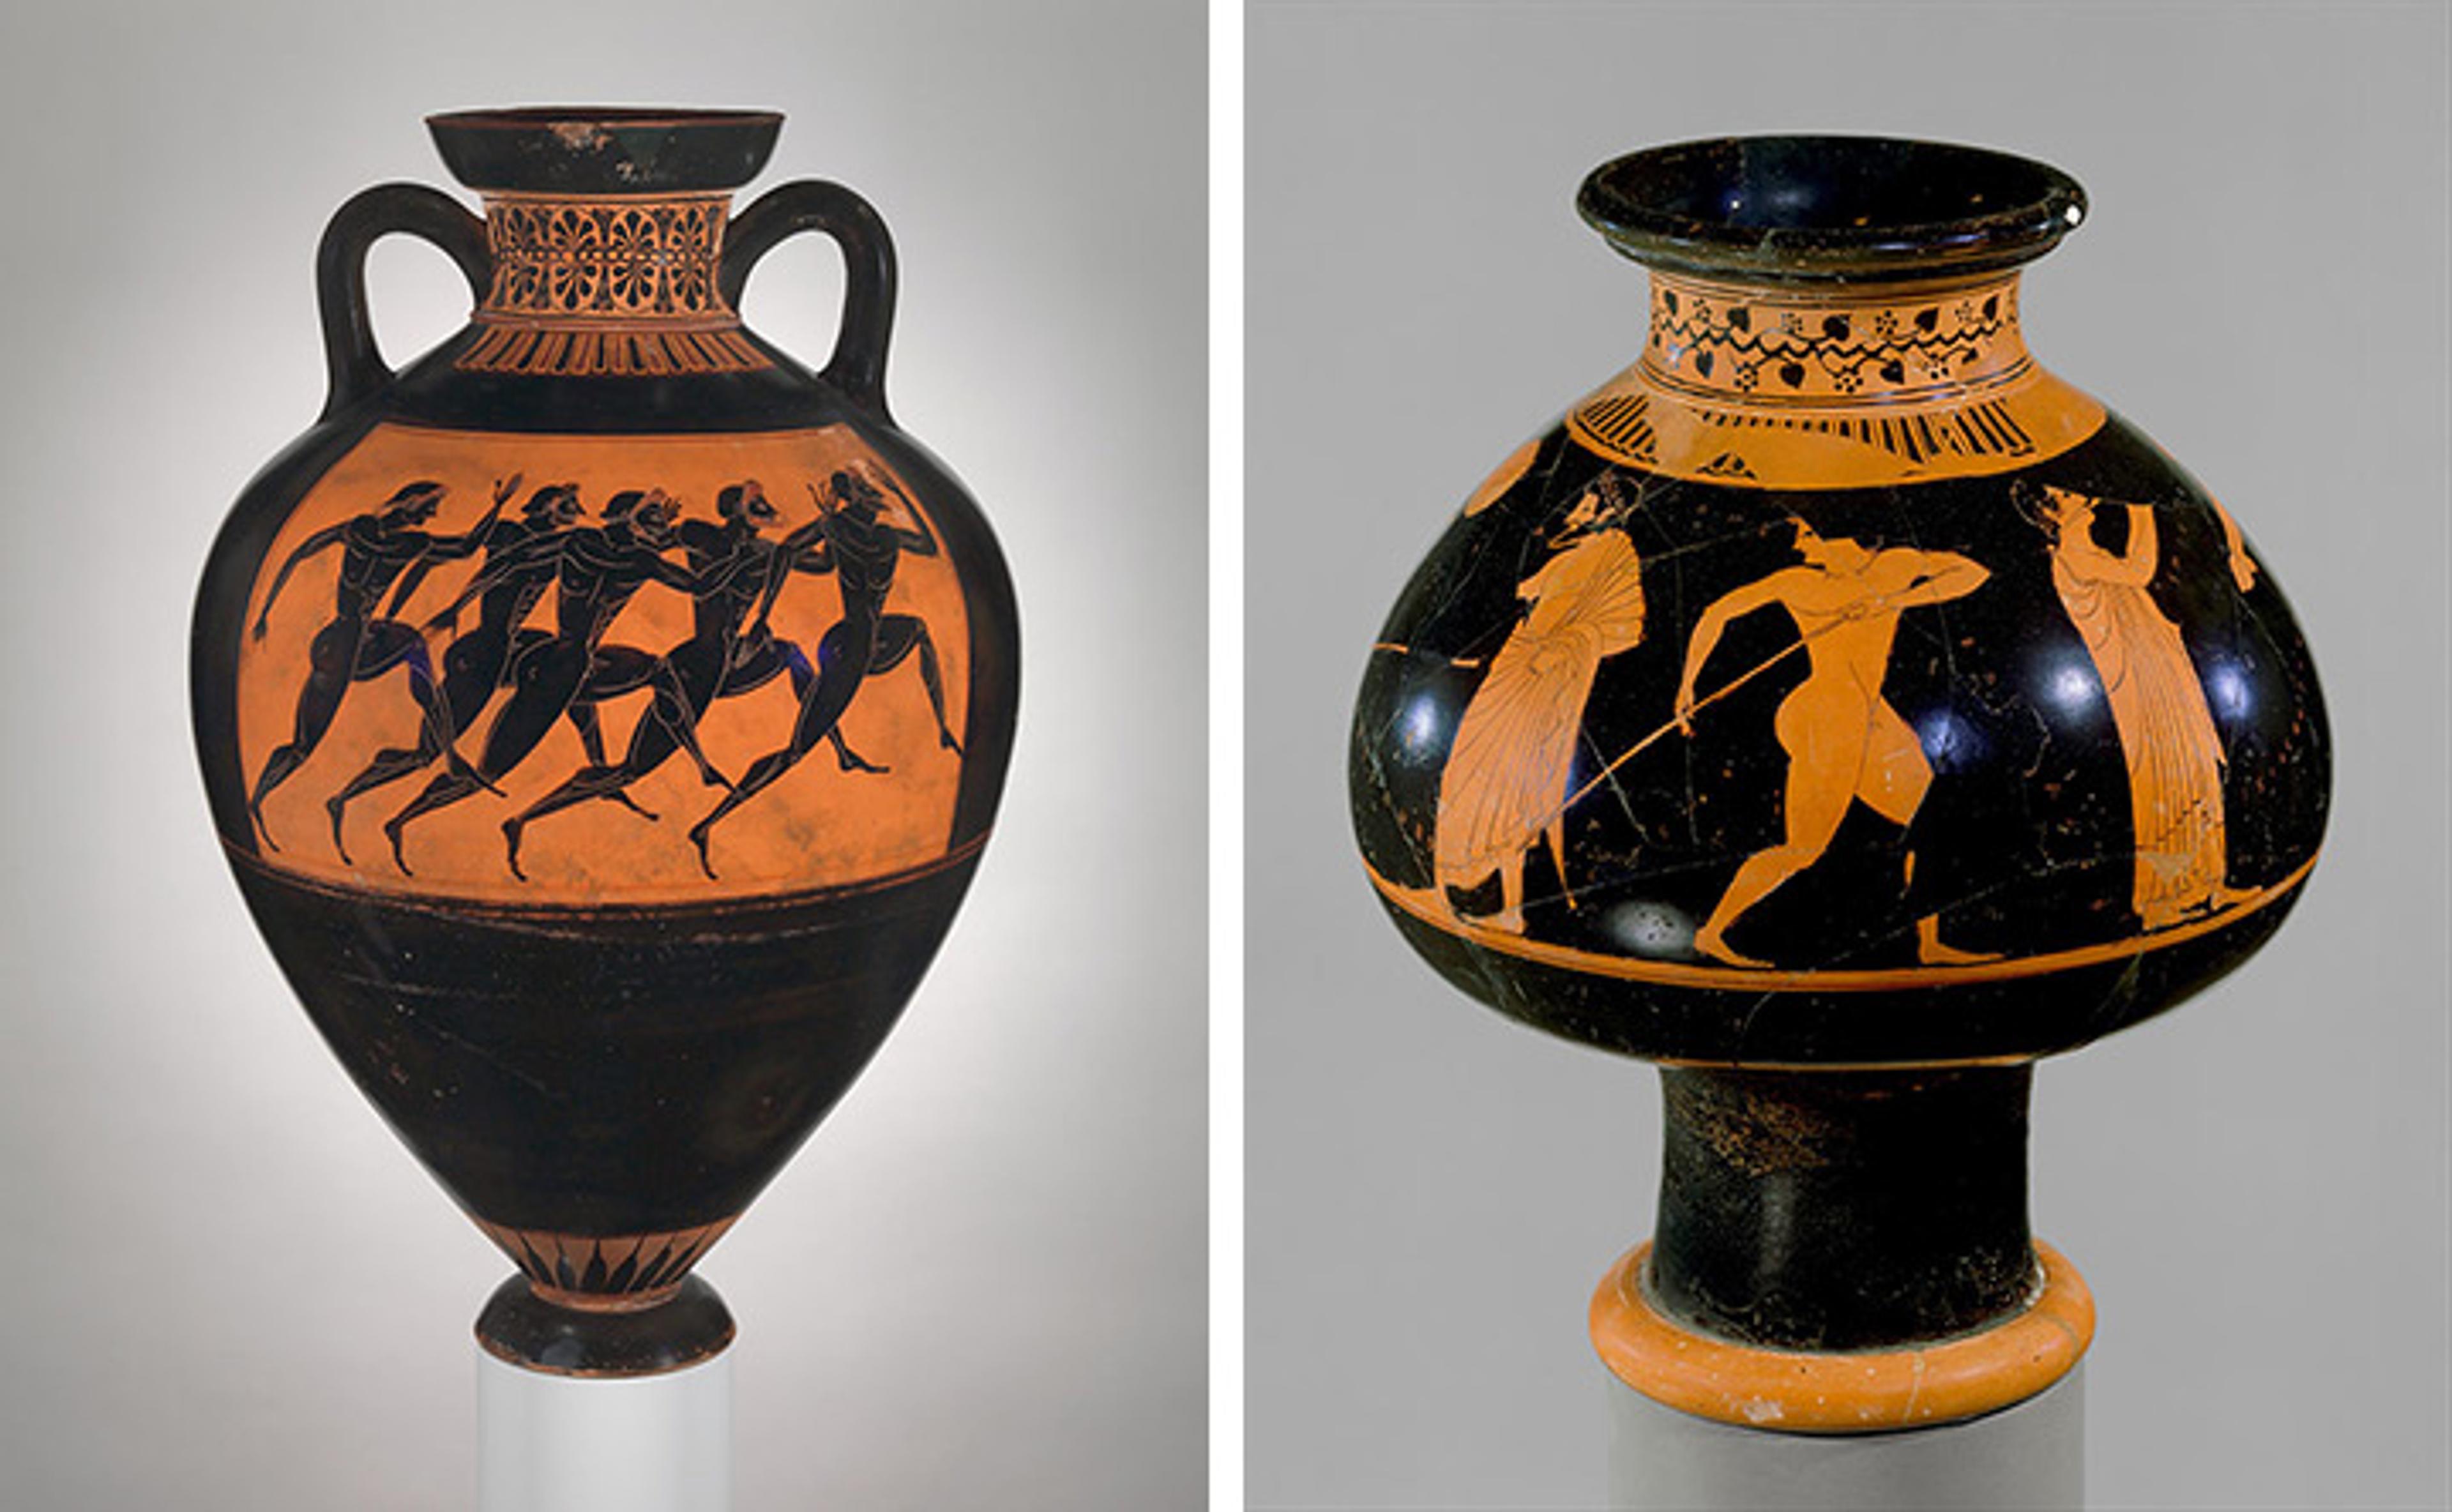 Greek vases showing runners and athletes